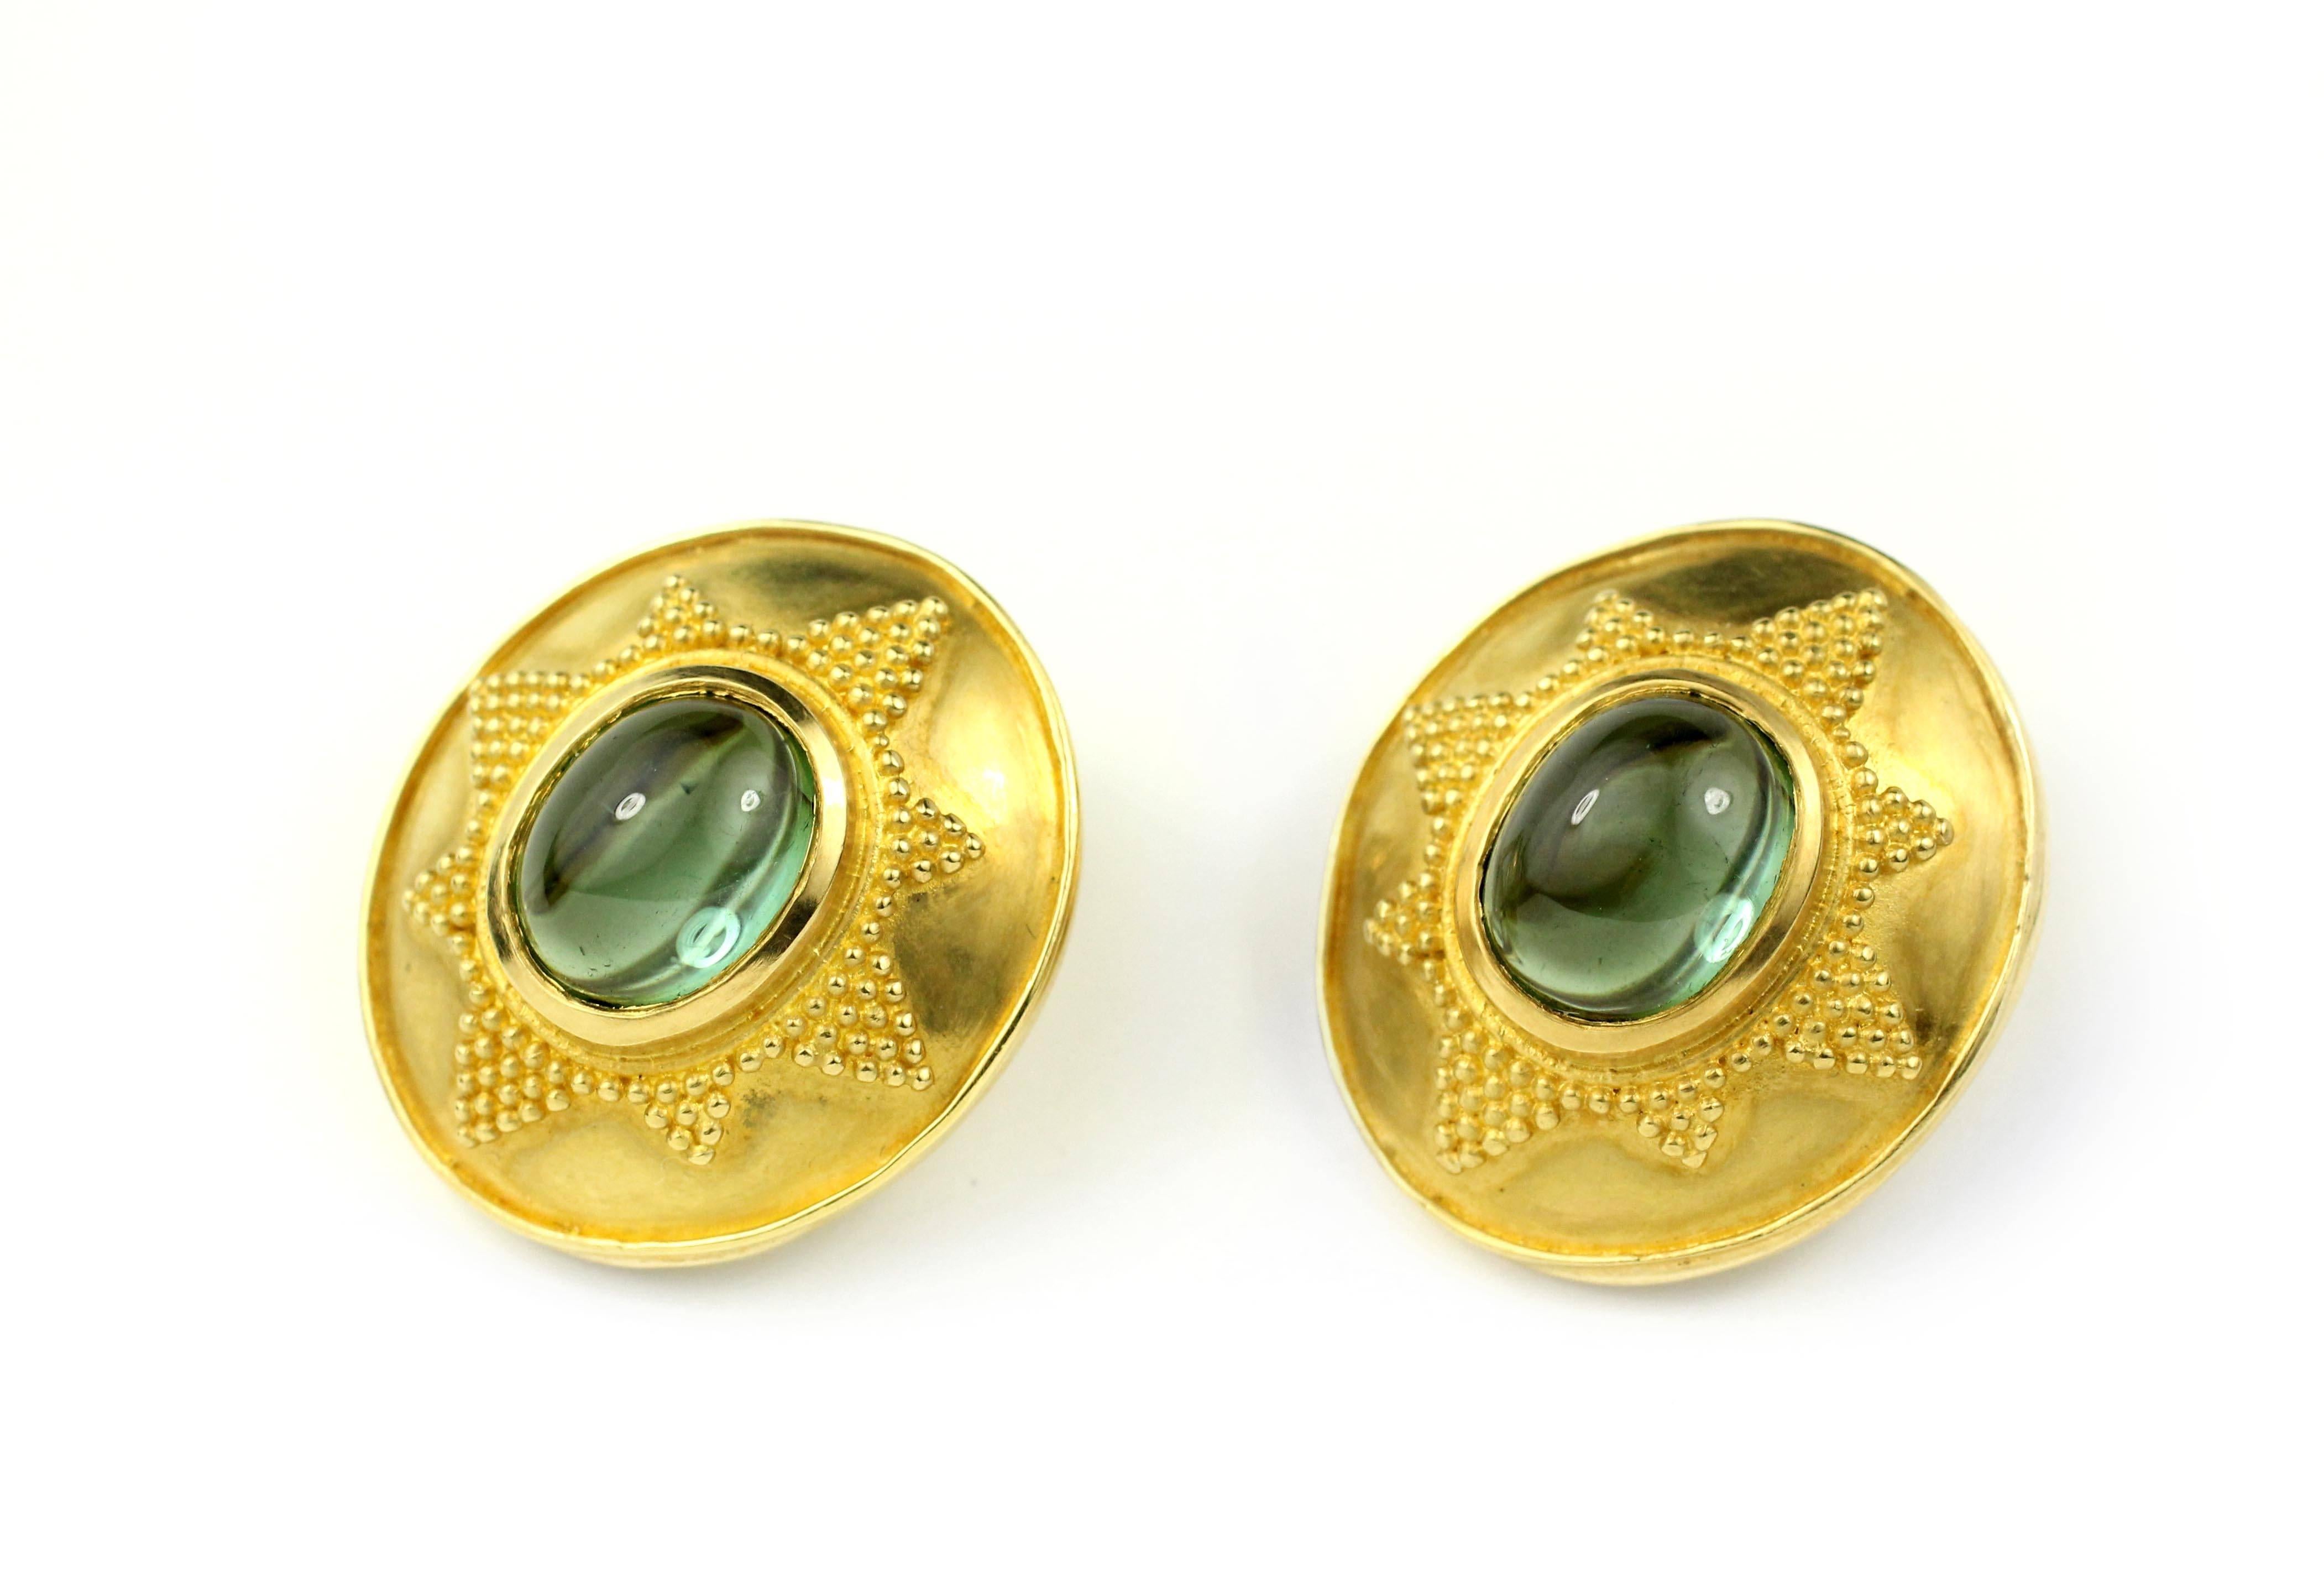 These beautiful green tourmaline cabochons (8.20 Cts.) are surrounded by lustrous 22 Kt Gold settings.  Clip backs are constructed of 18 Kt Gold for added strength and durability.  

Designed and made in house by Julius Cohen New York